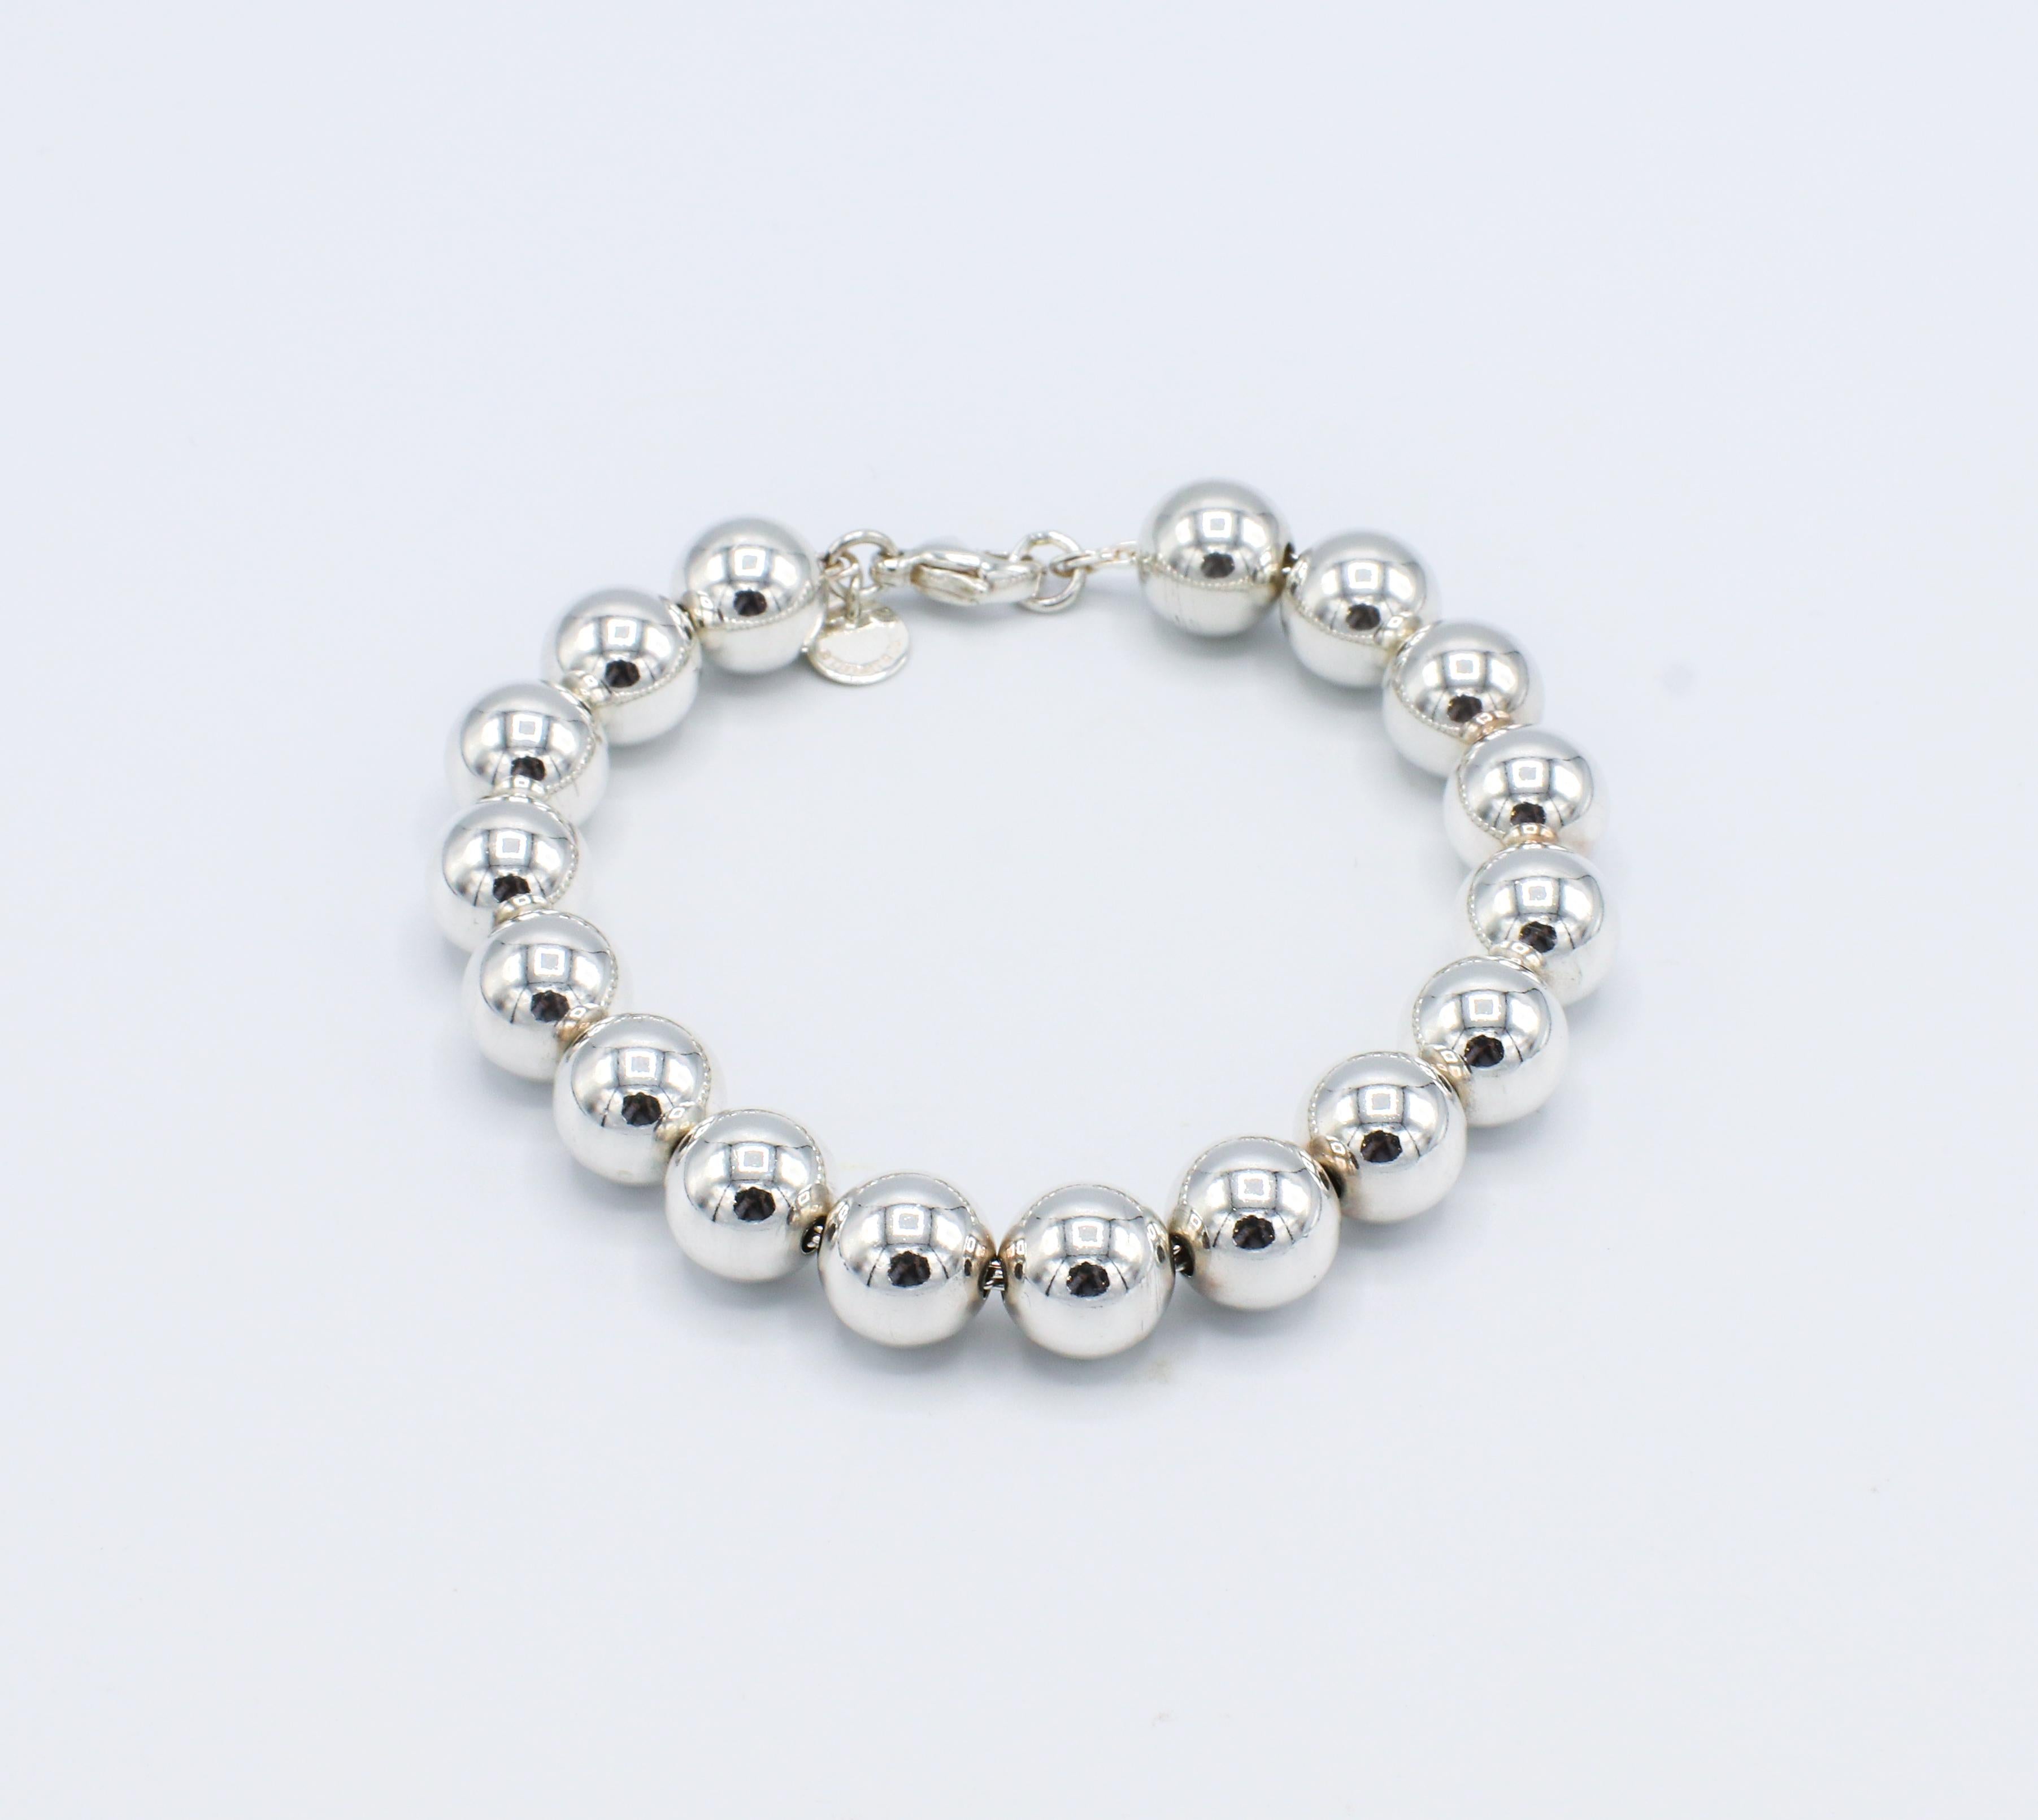 Tiffany & Co. HardWear Sterling Silver Ball Bead Bracelet 
Metal: Sterling silver
Weight: 18.75 grams
Width: 10mm
Length:  7 inches
Retail: $525 USD
